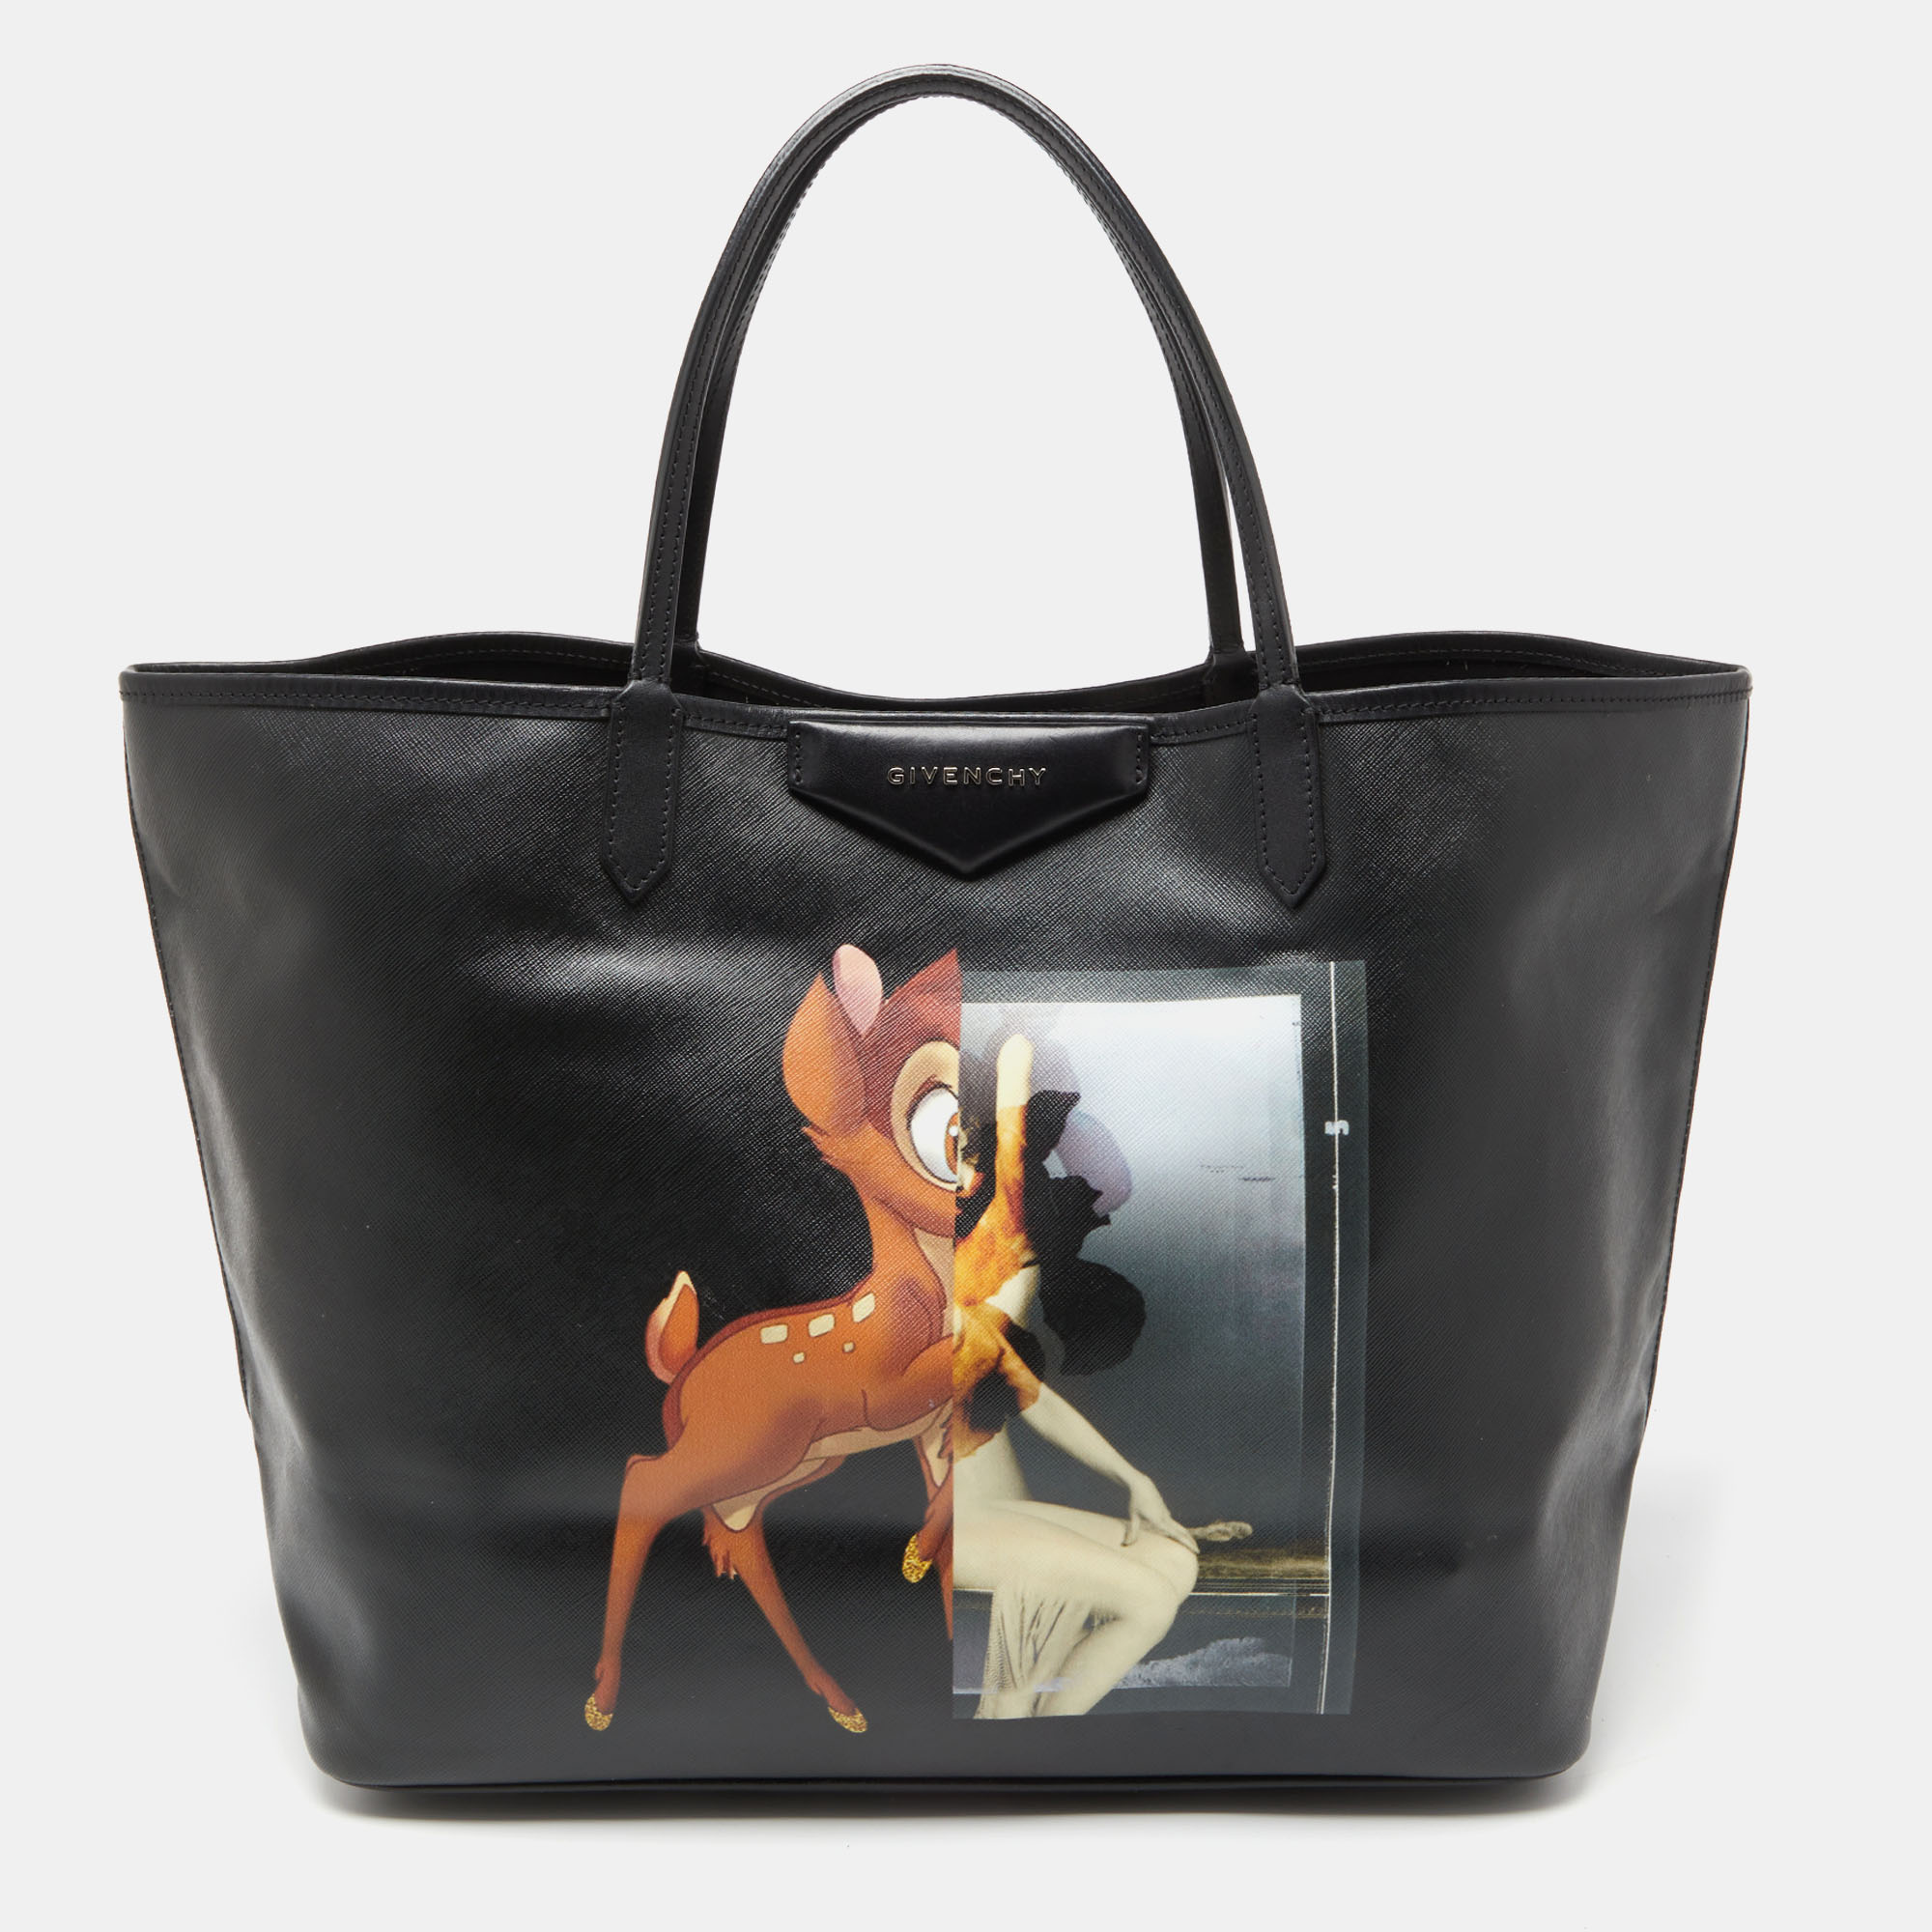 Indulge in timeless luxury with this Givenchy shopper bag. Meticulously handcrafted this iconic piece combines heritage elegance and craftsmanship elevating your style to a level of unmatched sophistication.